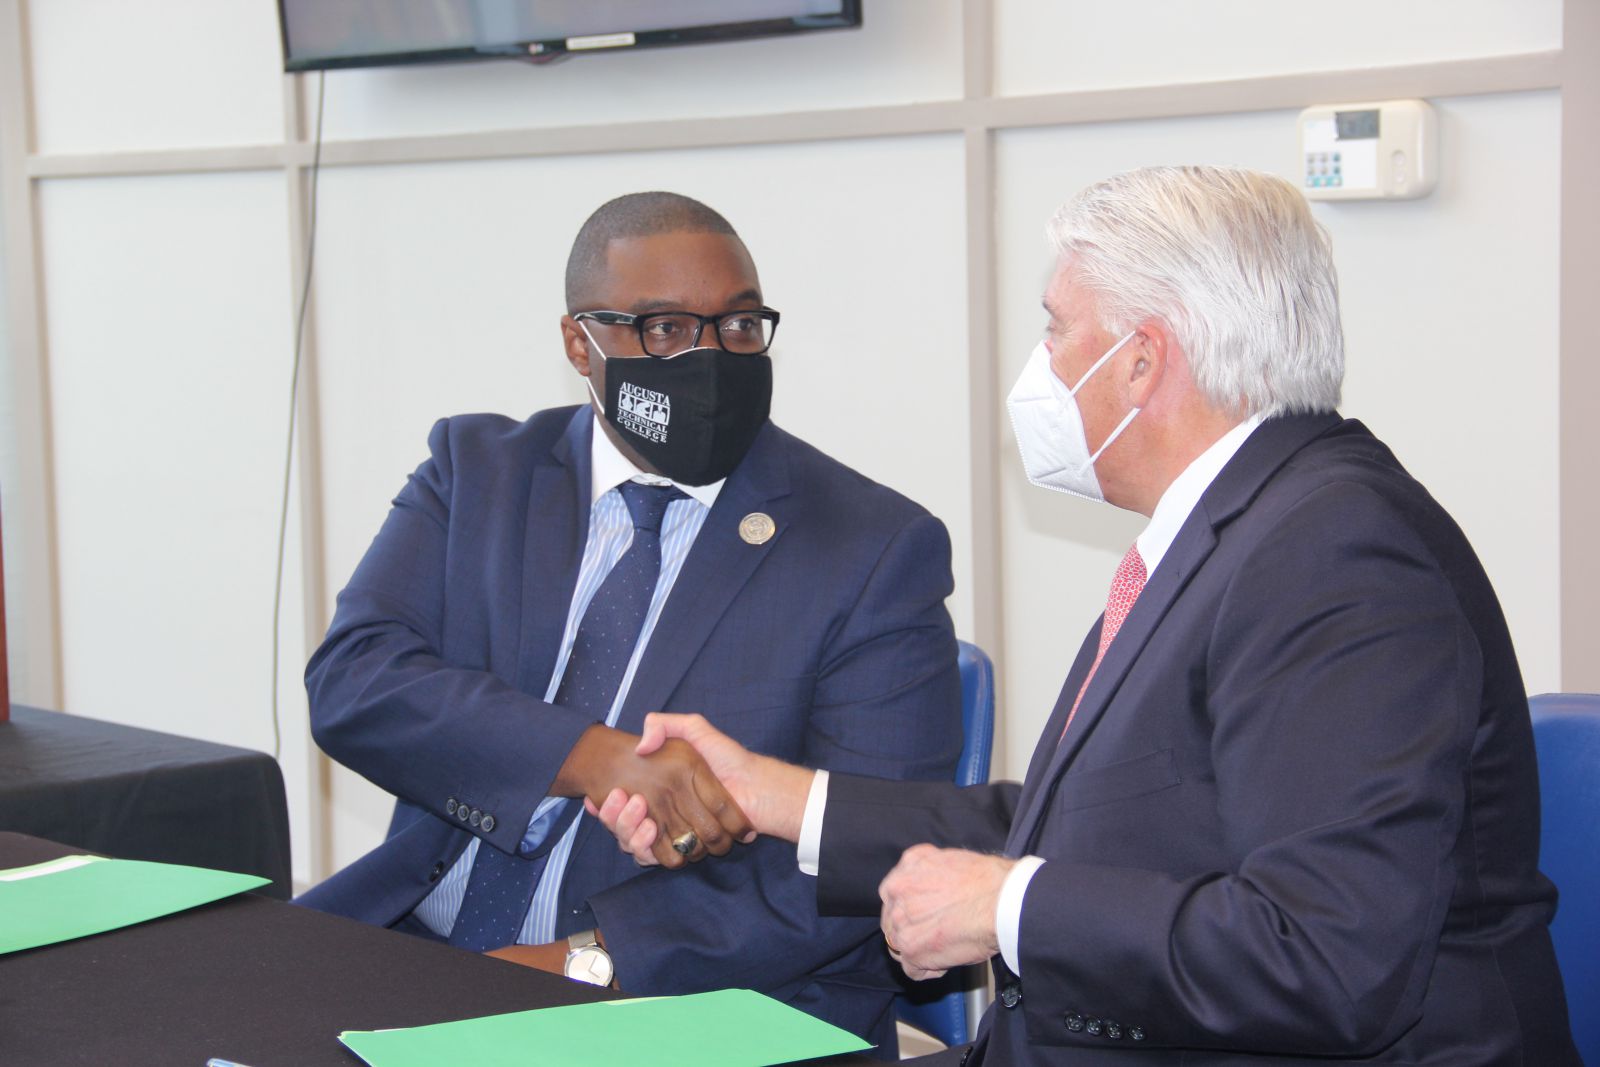 President of Augusta Technical College, Dr. Jermaine Whirl, shakes hands with University Health Care System Chief Executive Officer, James R. Davis.